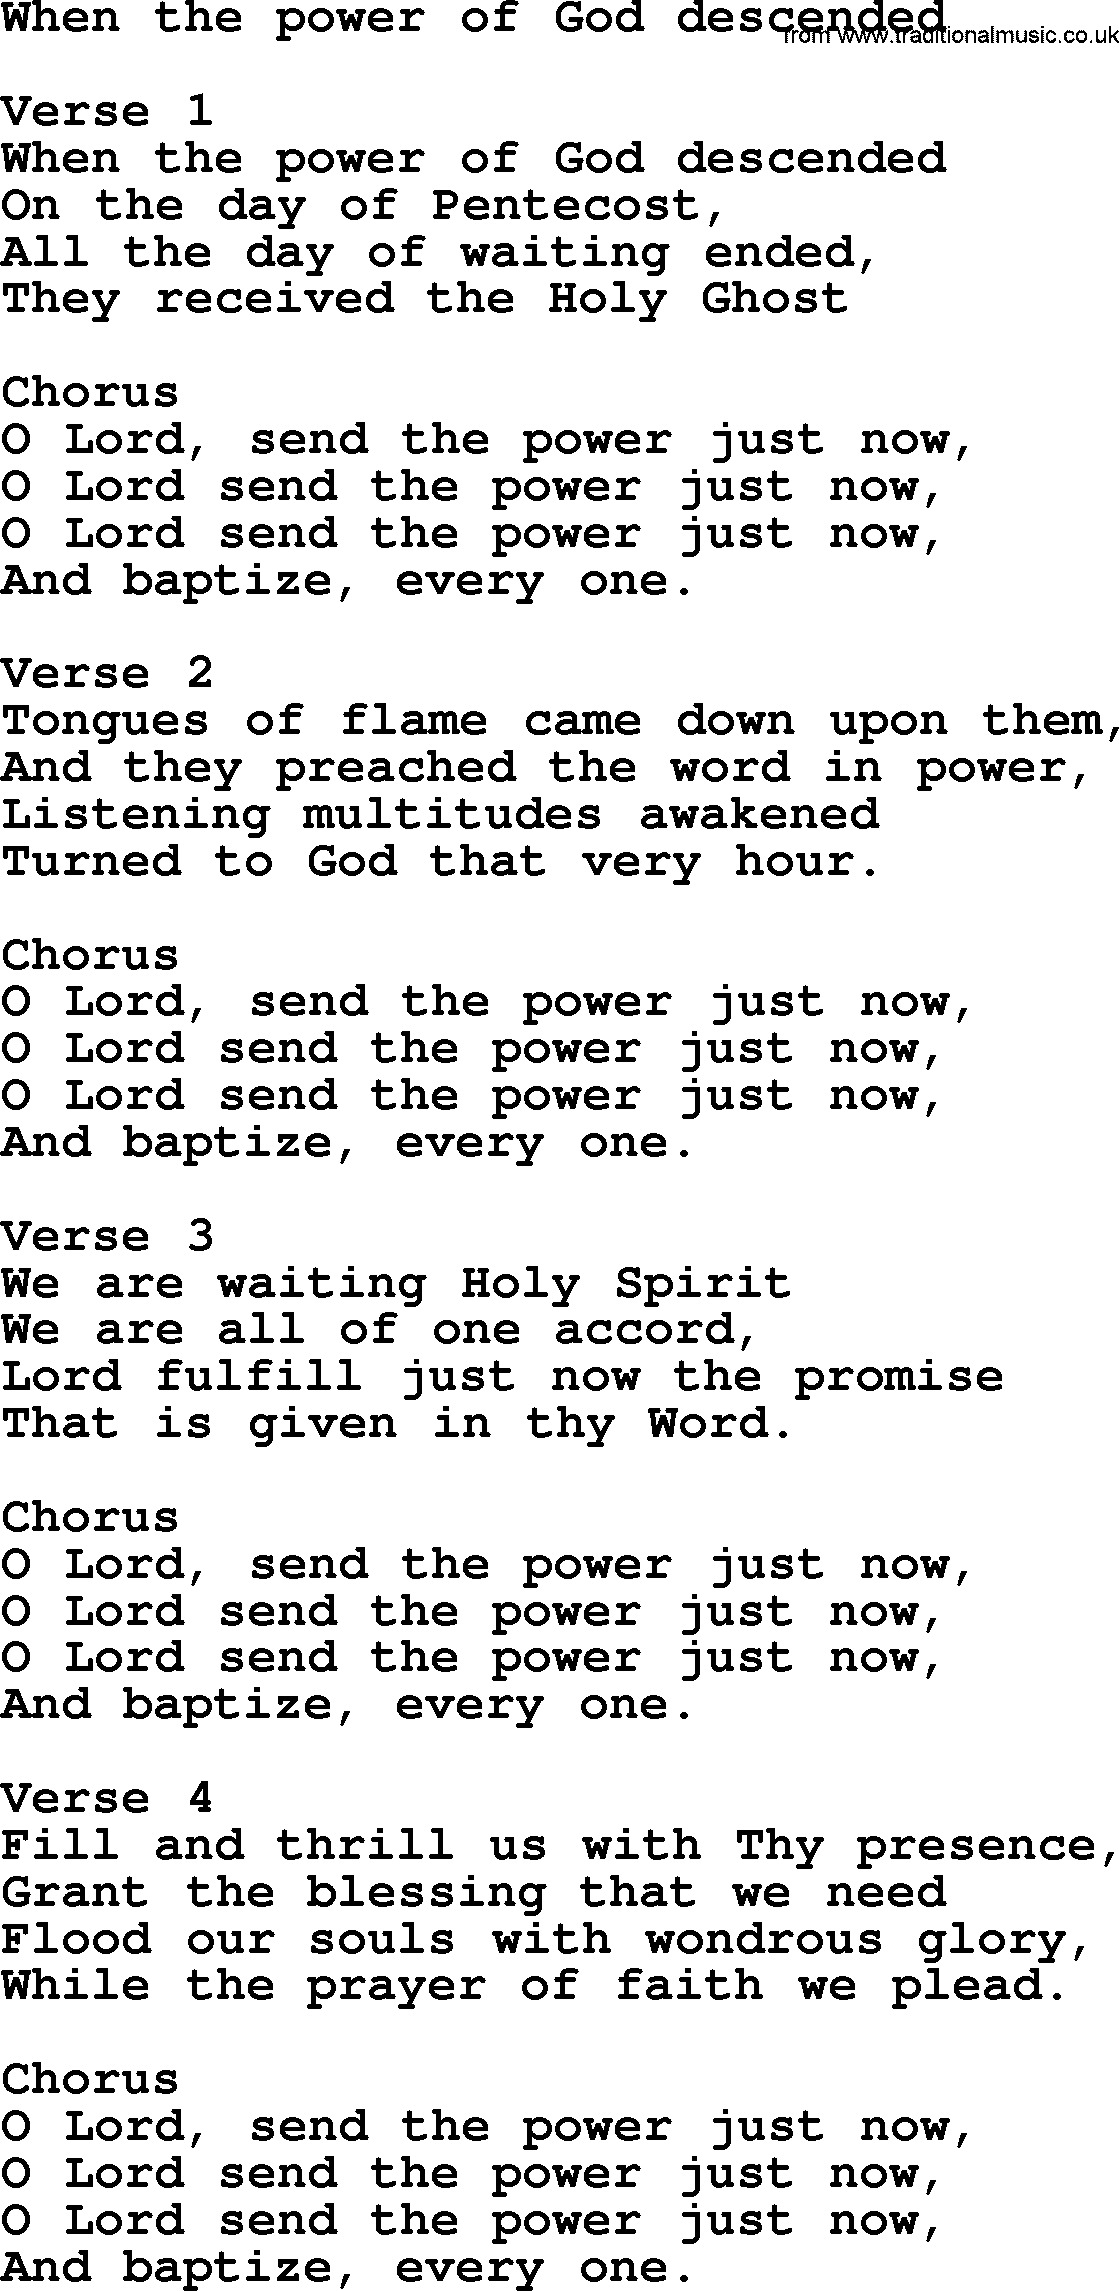 Apostolic and Pentecostal Hymns and Gospel Songs, Hymn: When The Power Of God Descended, Christian lyrics and PDF